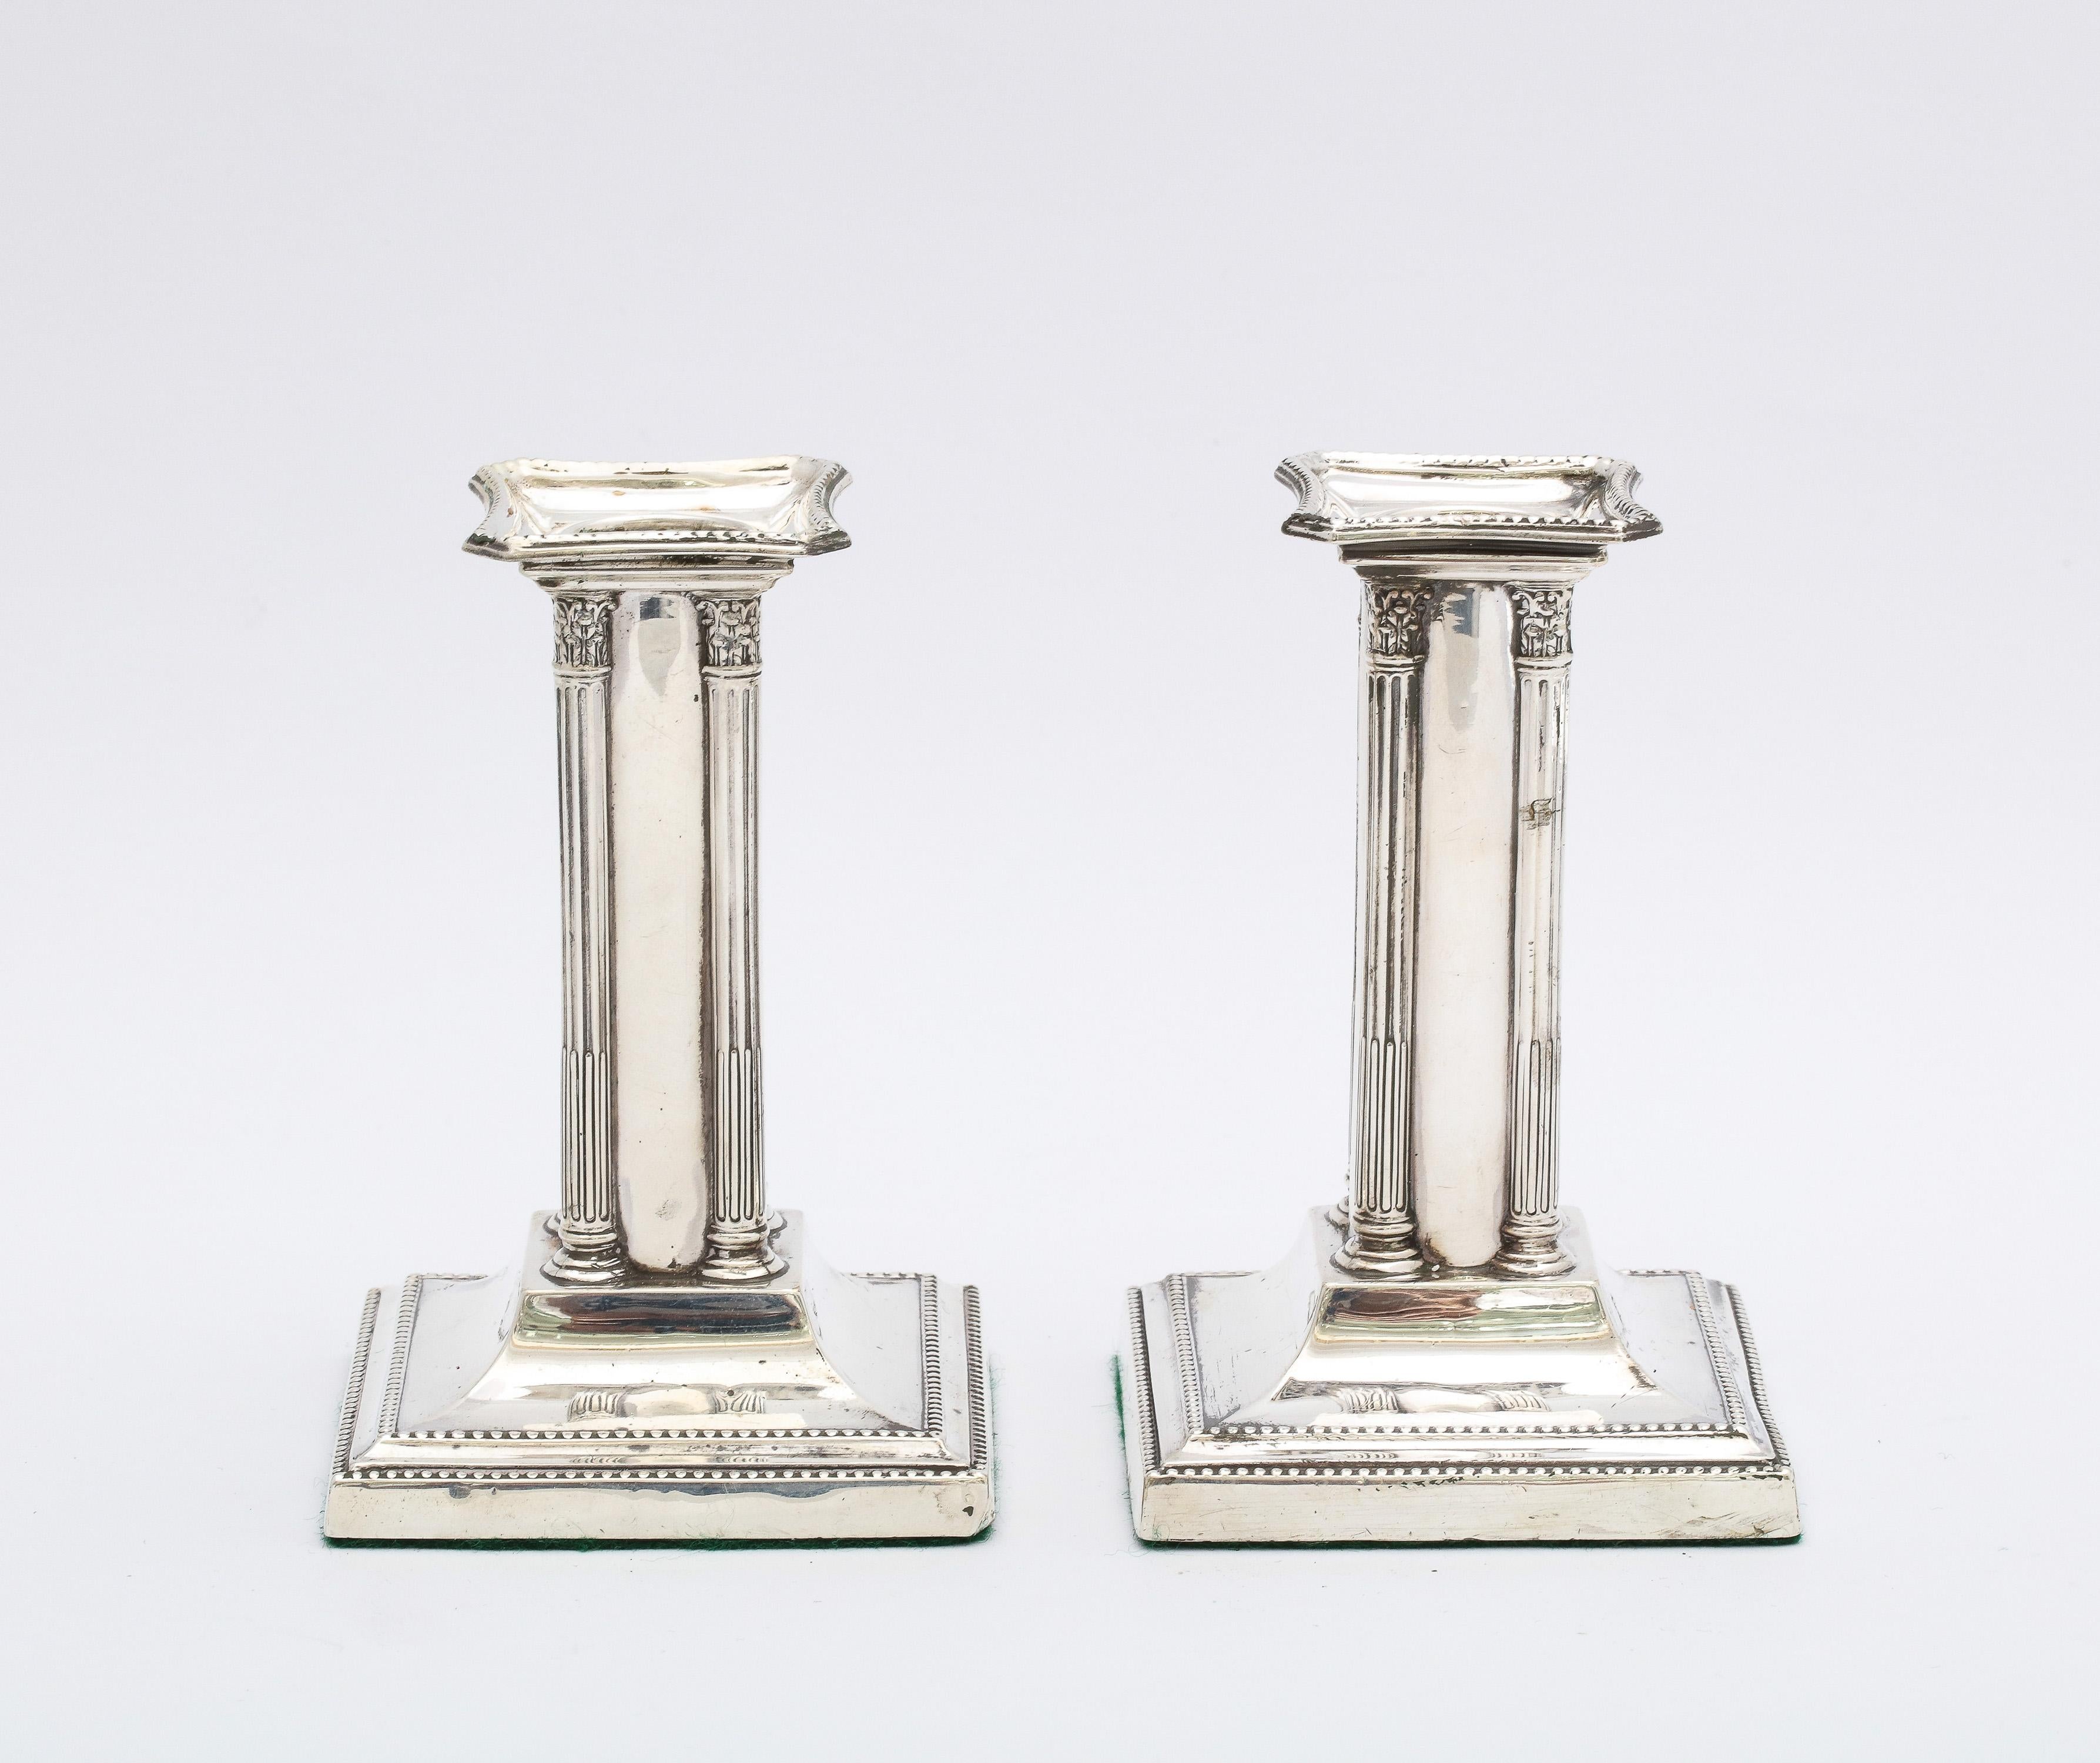 English Unusual Pair of Edwardian Period Neoclassical Style Sterling Silver Candlesticks For Sale